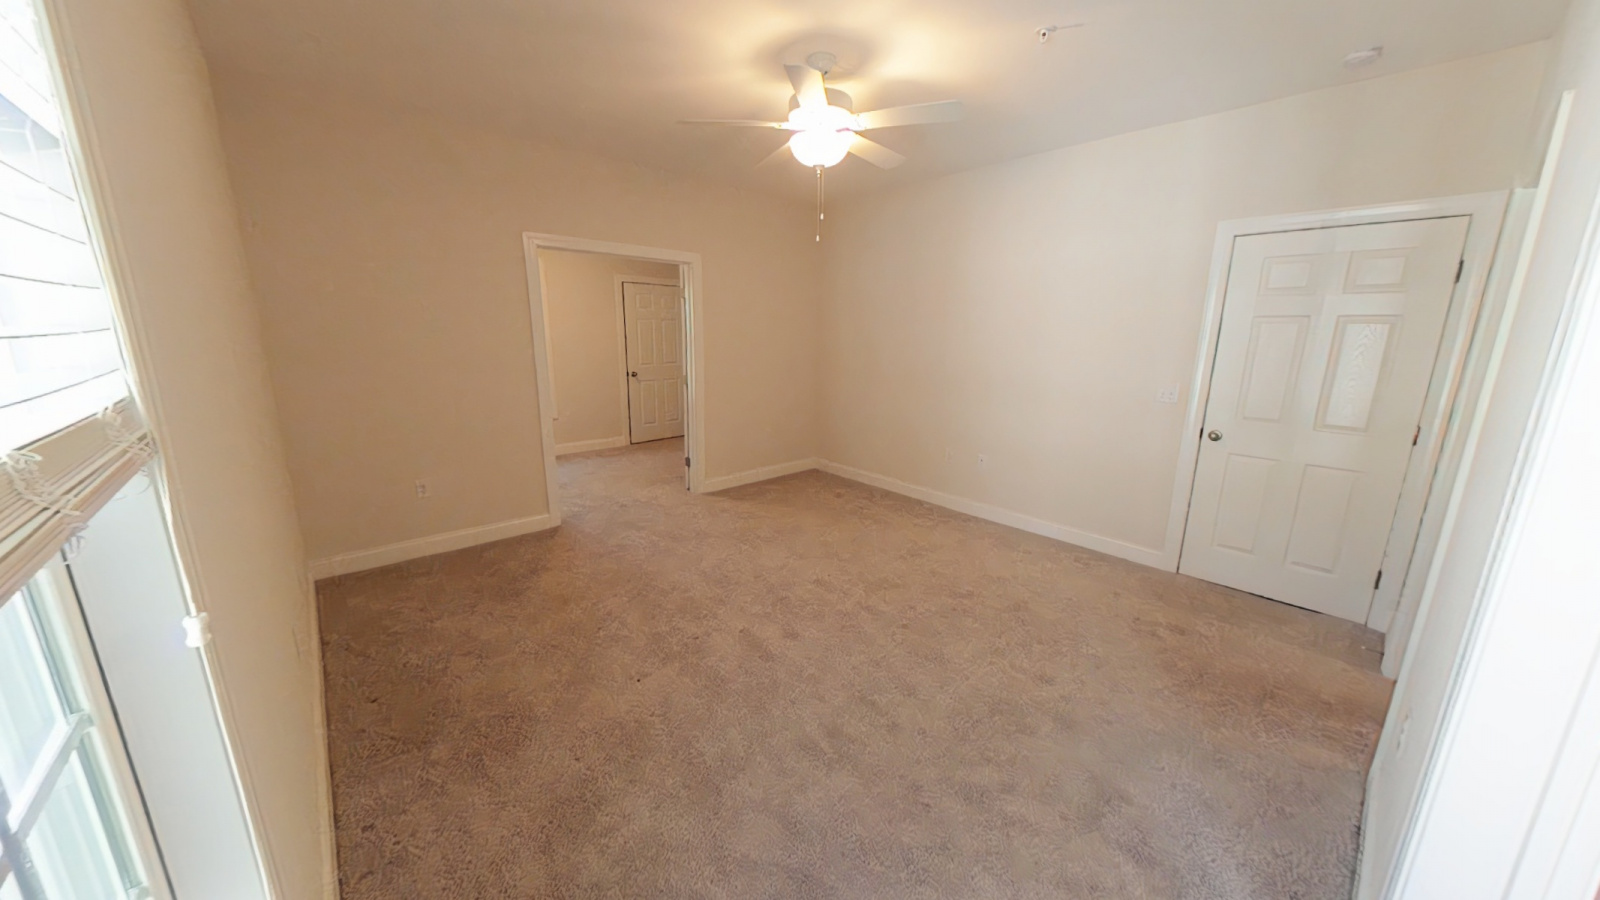 288-302 Gallery Drive, Spring Lake, North Carolina 28390, 2 Bedrooms Bedrooms, ,2 BathroomsBathrooms,Apartment,For Rent,Gallery,3,1139